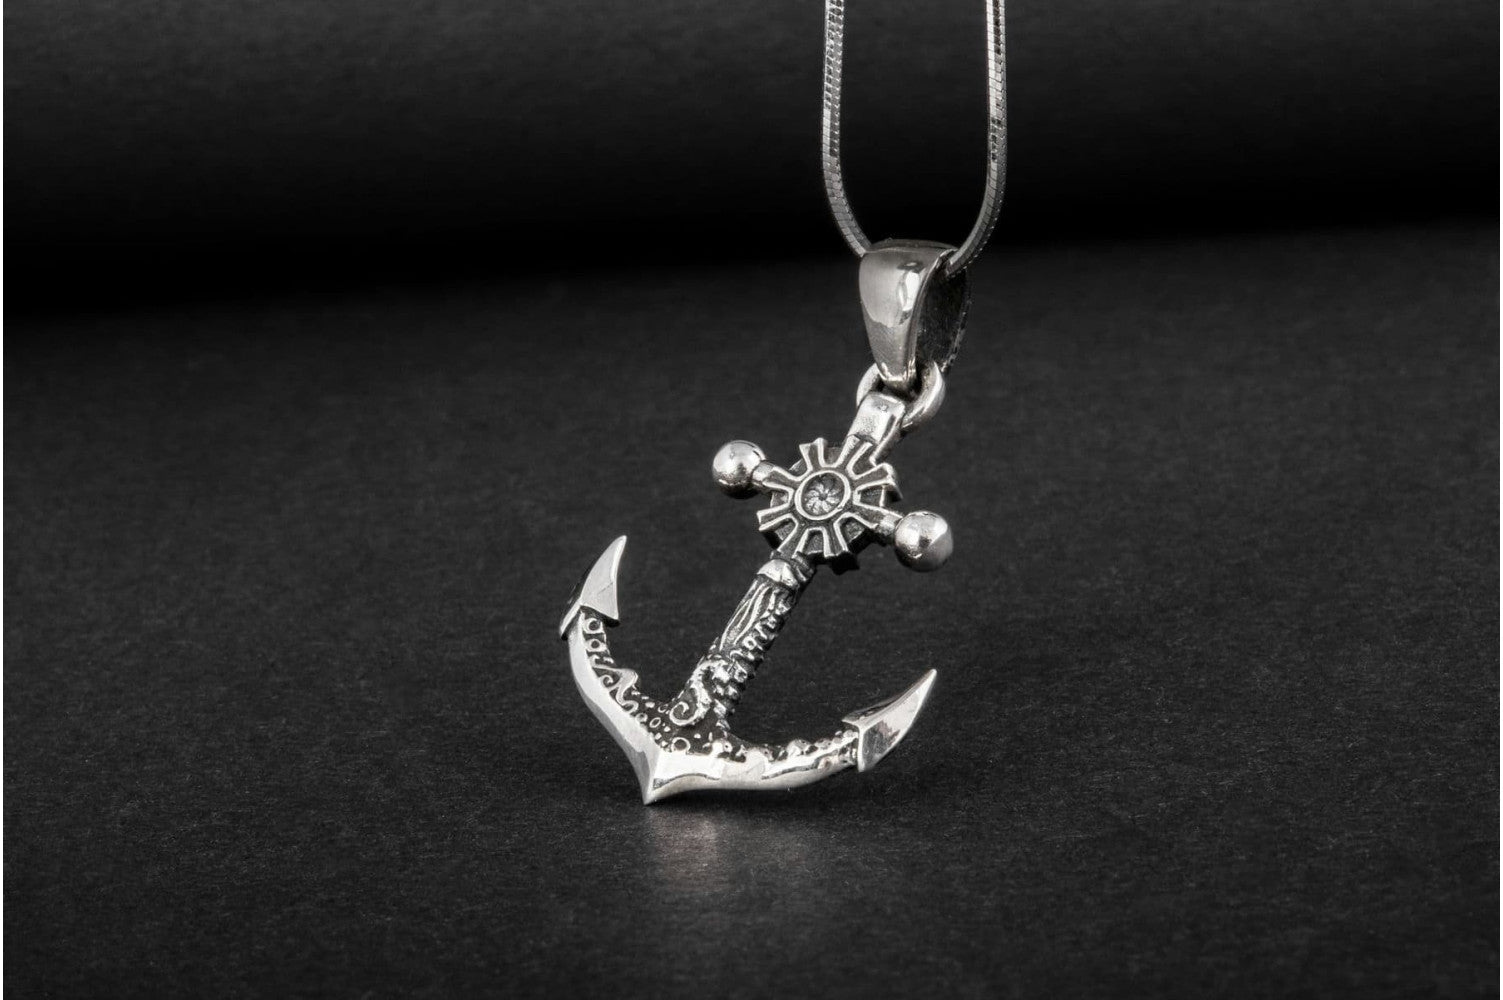 Small Anchor Symbol with Ship Steering Wheel Pendant Sterling Silver Norse Jewelry - vikingworkshop